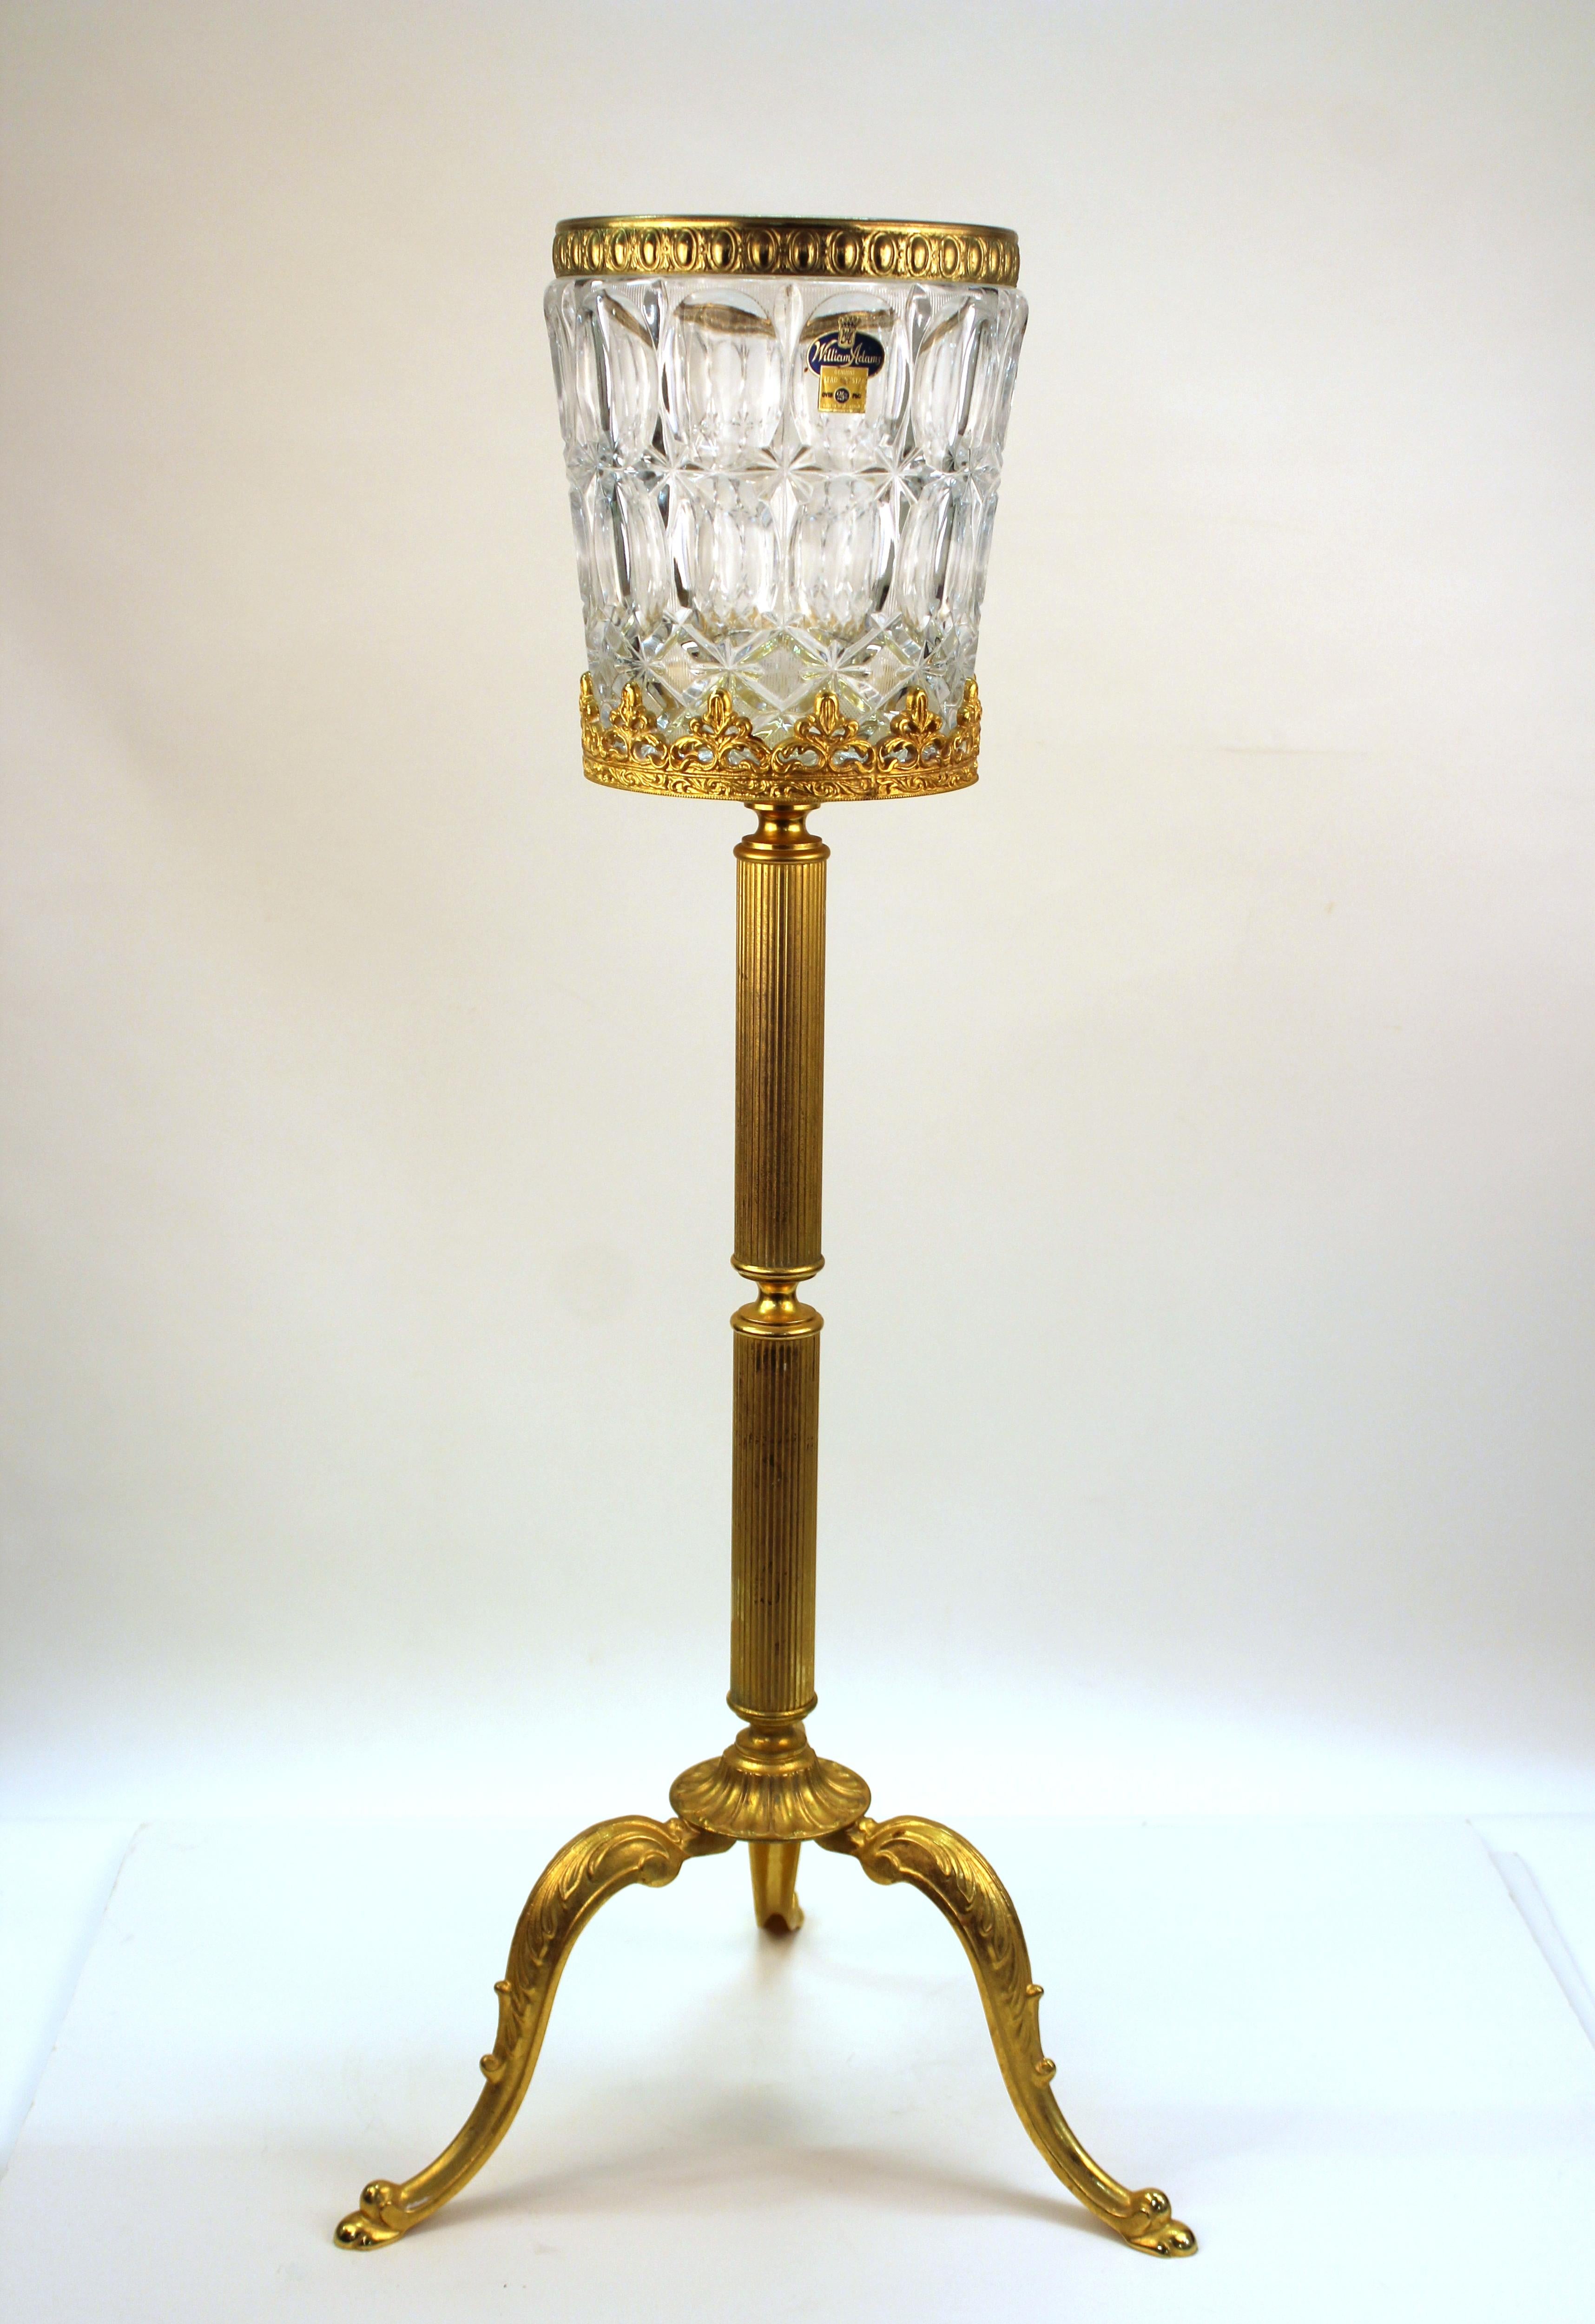 Champagne bucket from Germany produced during the mid-20th century. Features include a clear cut crystal bucket with geometric faceted designs and a 24-karat gilded stand. The piece stands on three curved legs and an intricate column body. A German